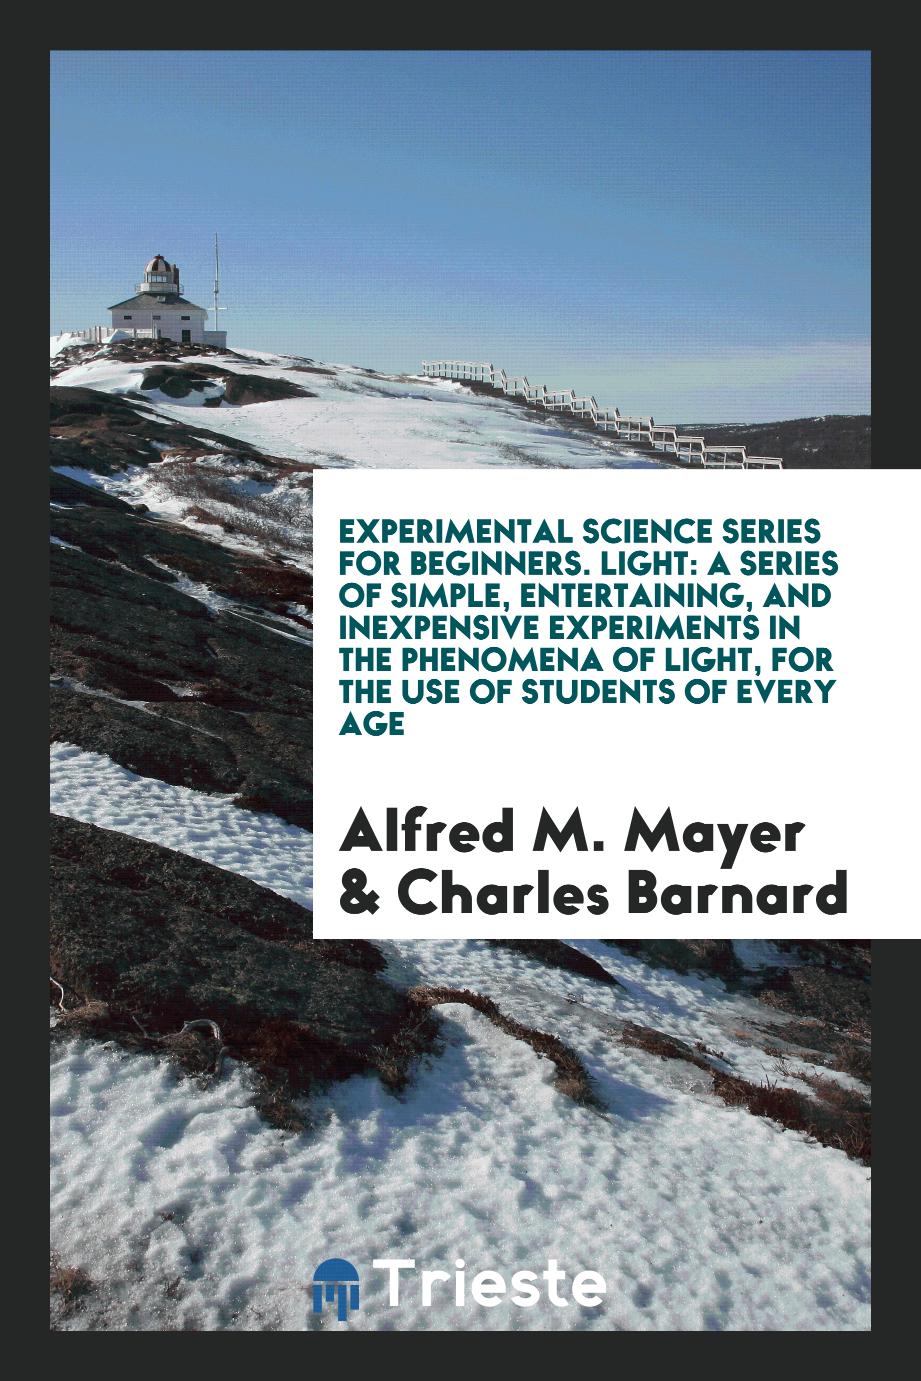 Experimental Science Series for Beginners. Light: A Series of Simple, Entertaining, and Inexpensive Experiments in the Phenomena of Light, for the Use of Students of Every Age